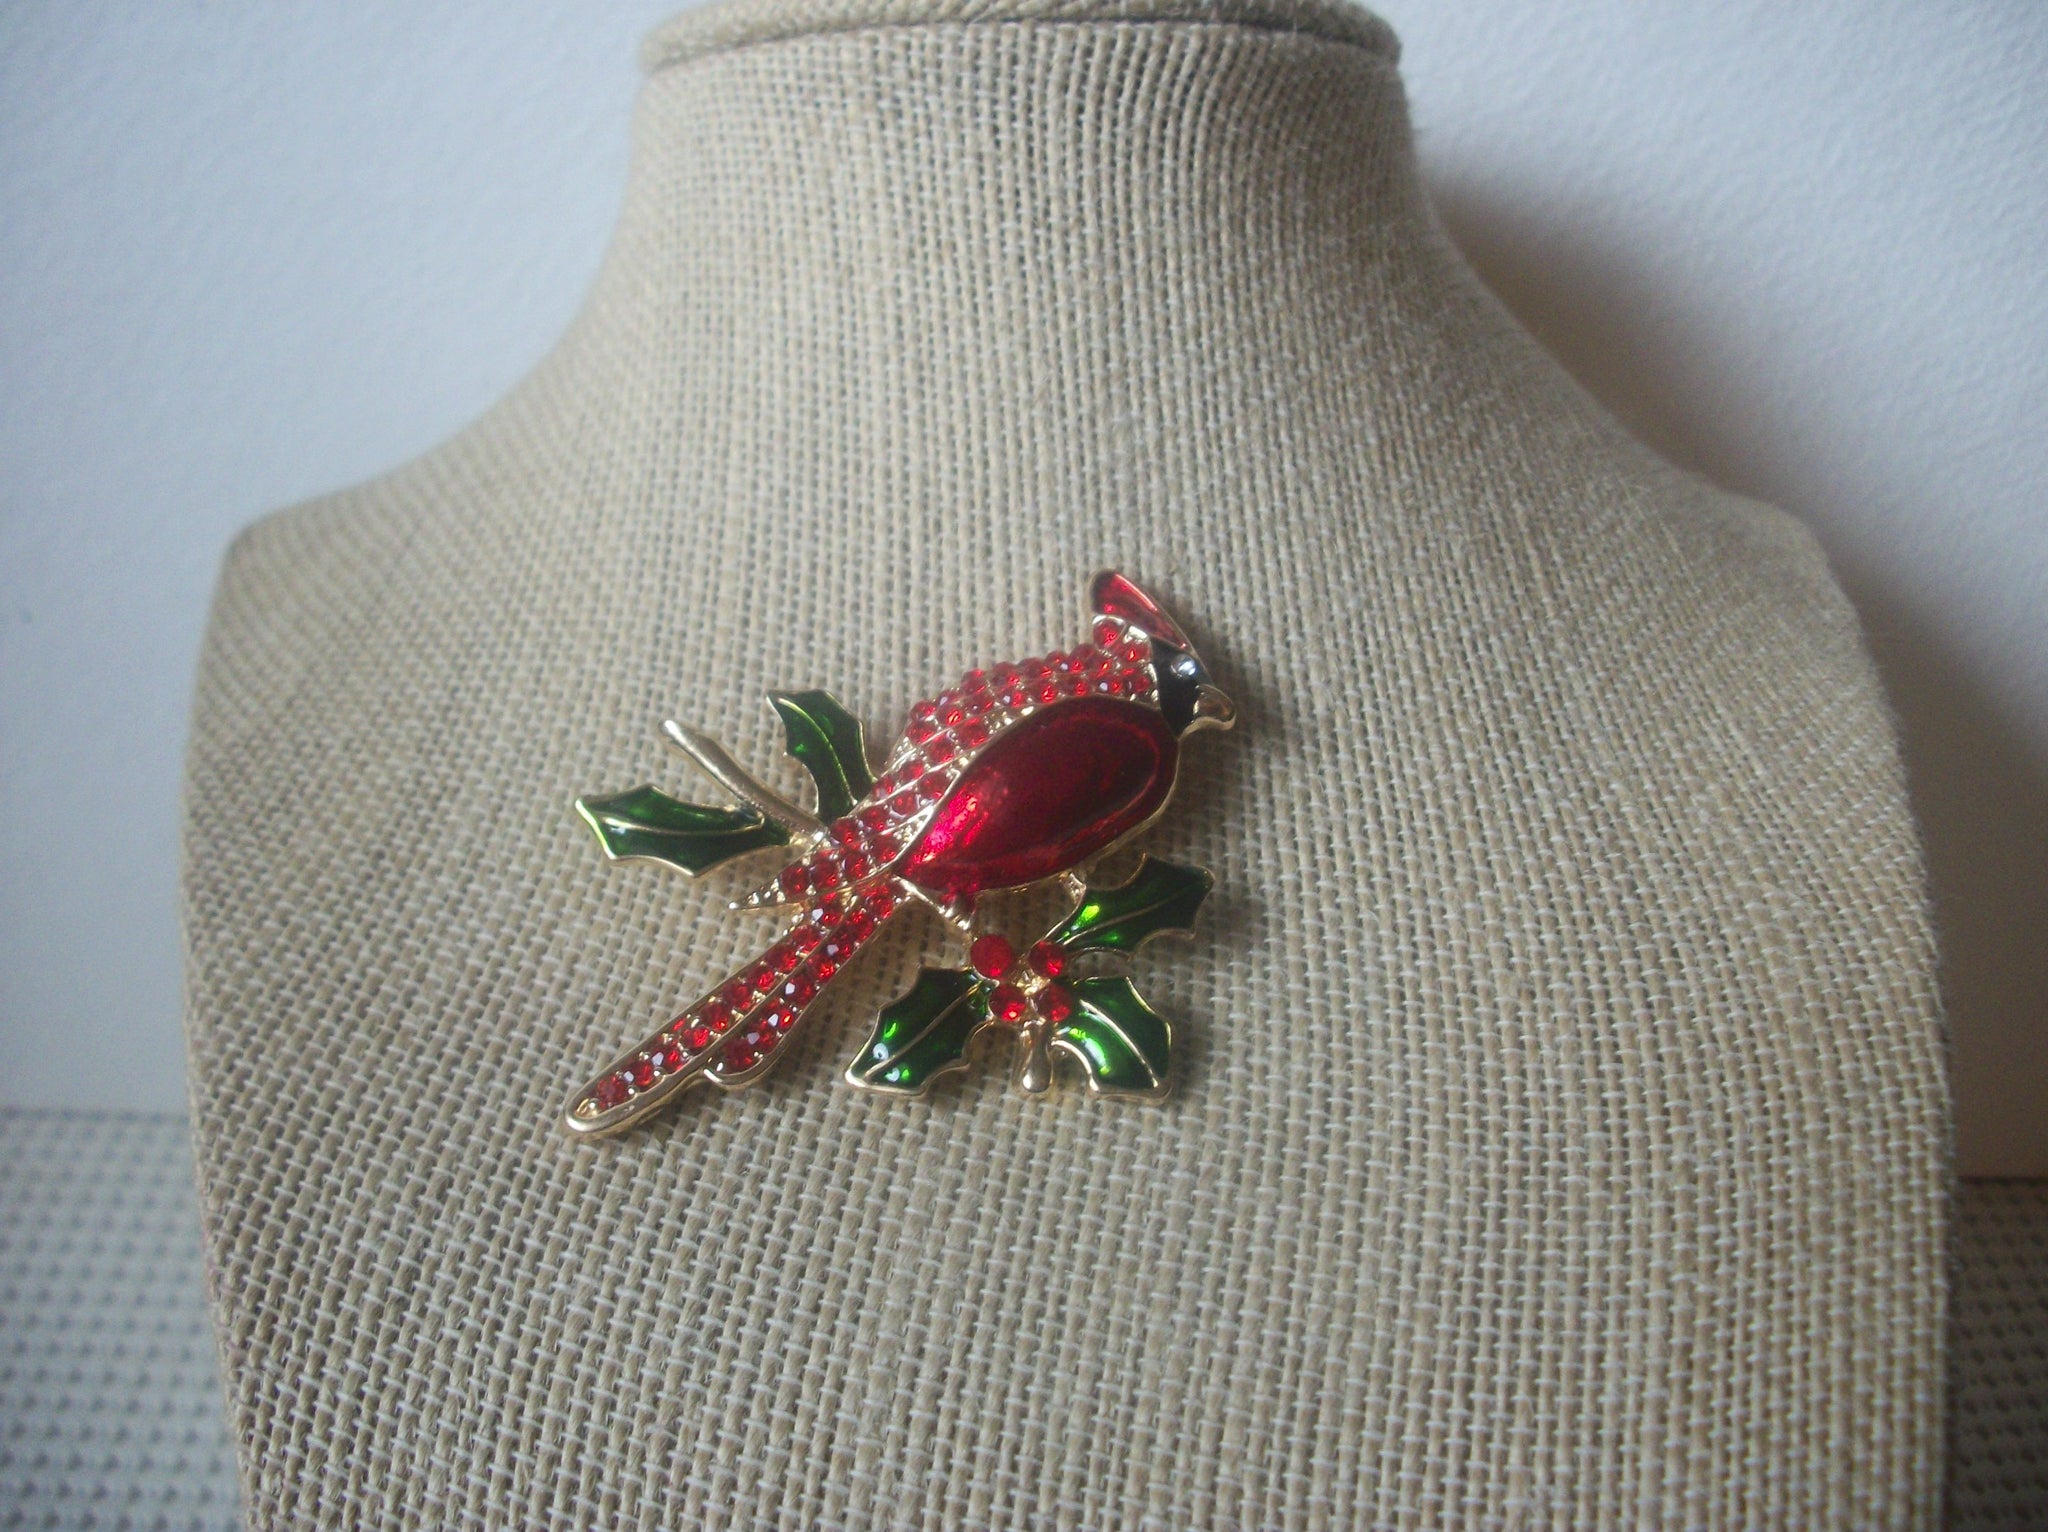 Vintage Jewelry, Red Bird, Cardinal Sparkling Red Crystal Rhinestones, Green Leaves, Gold Tone, Brooch Pin 022621